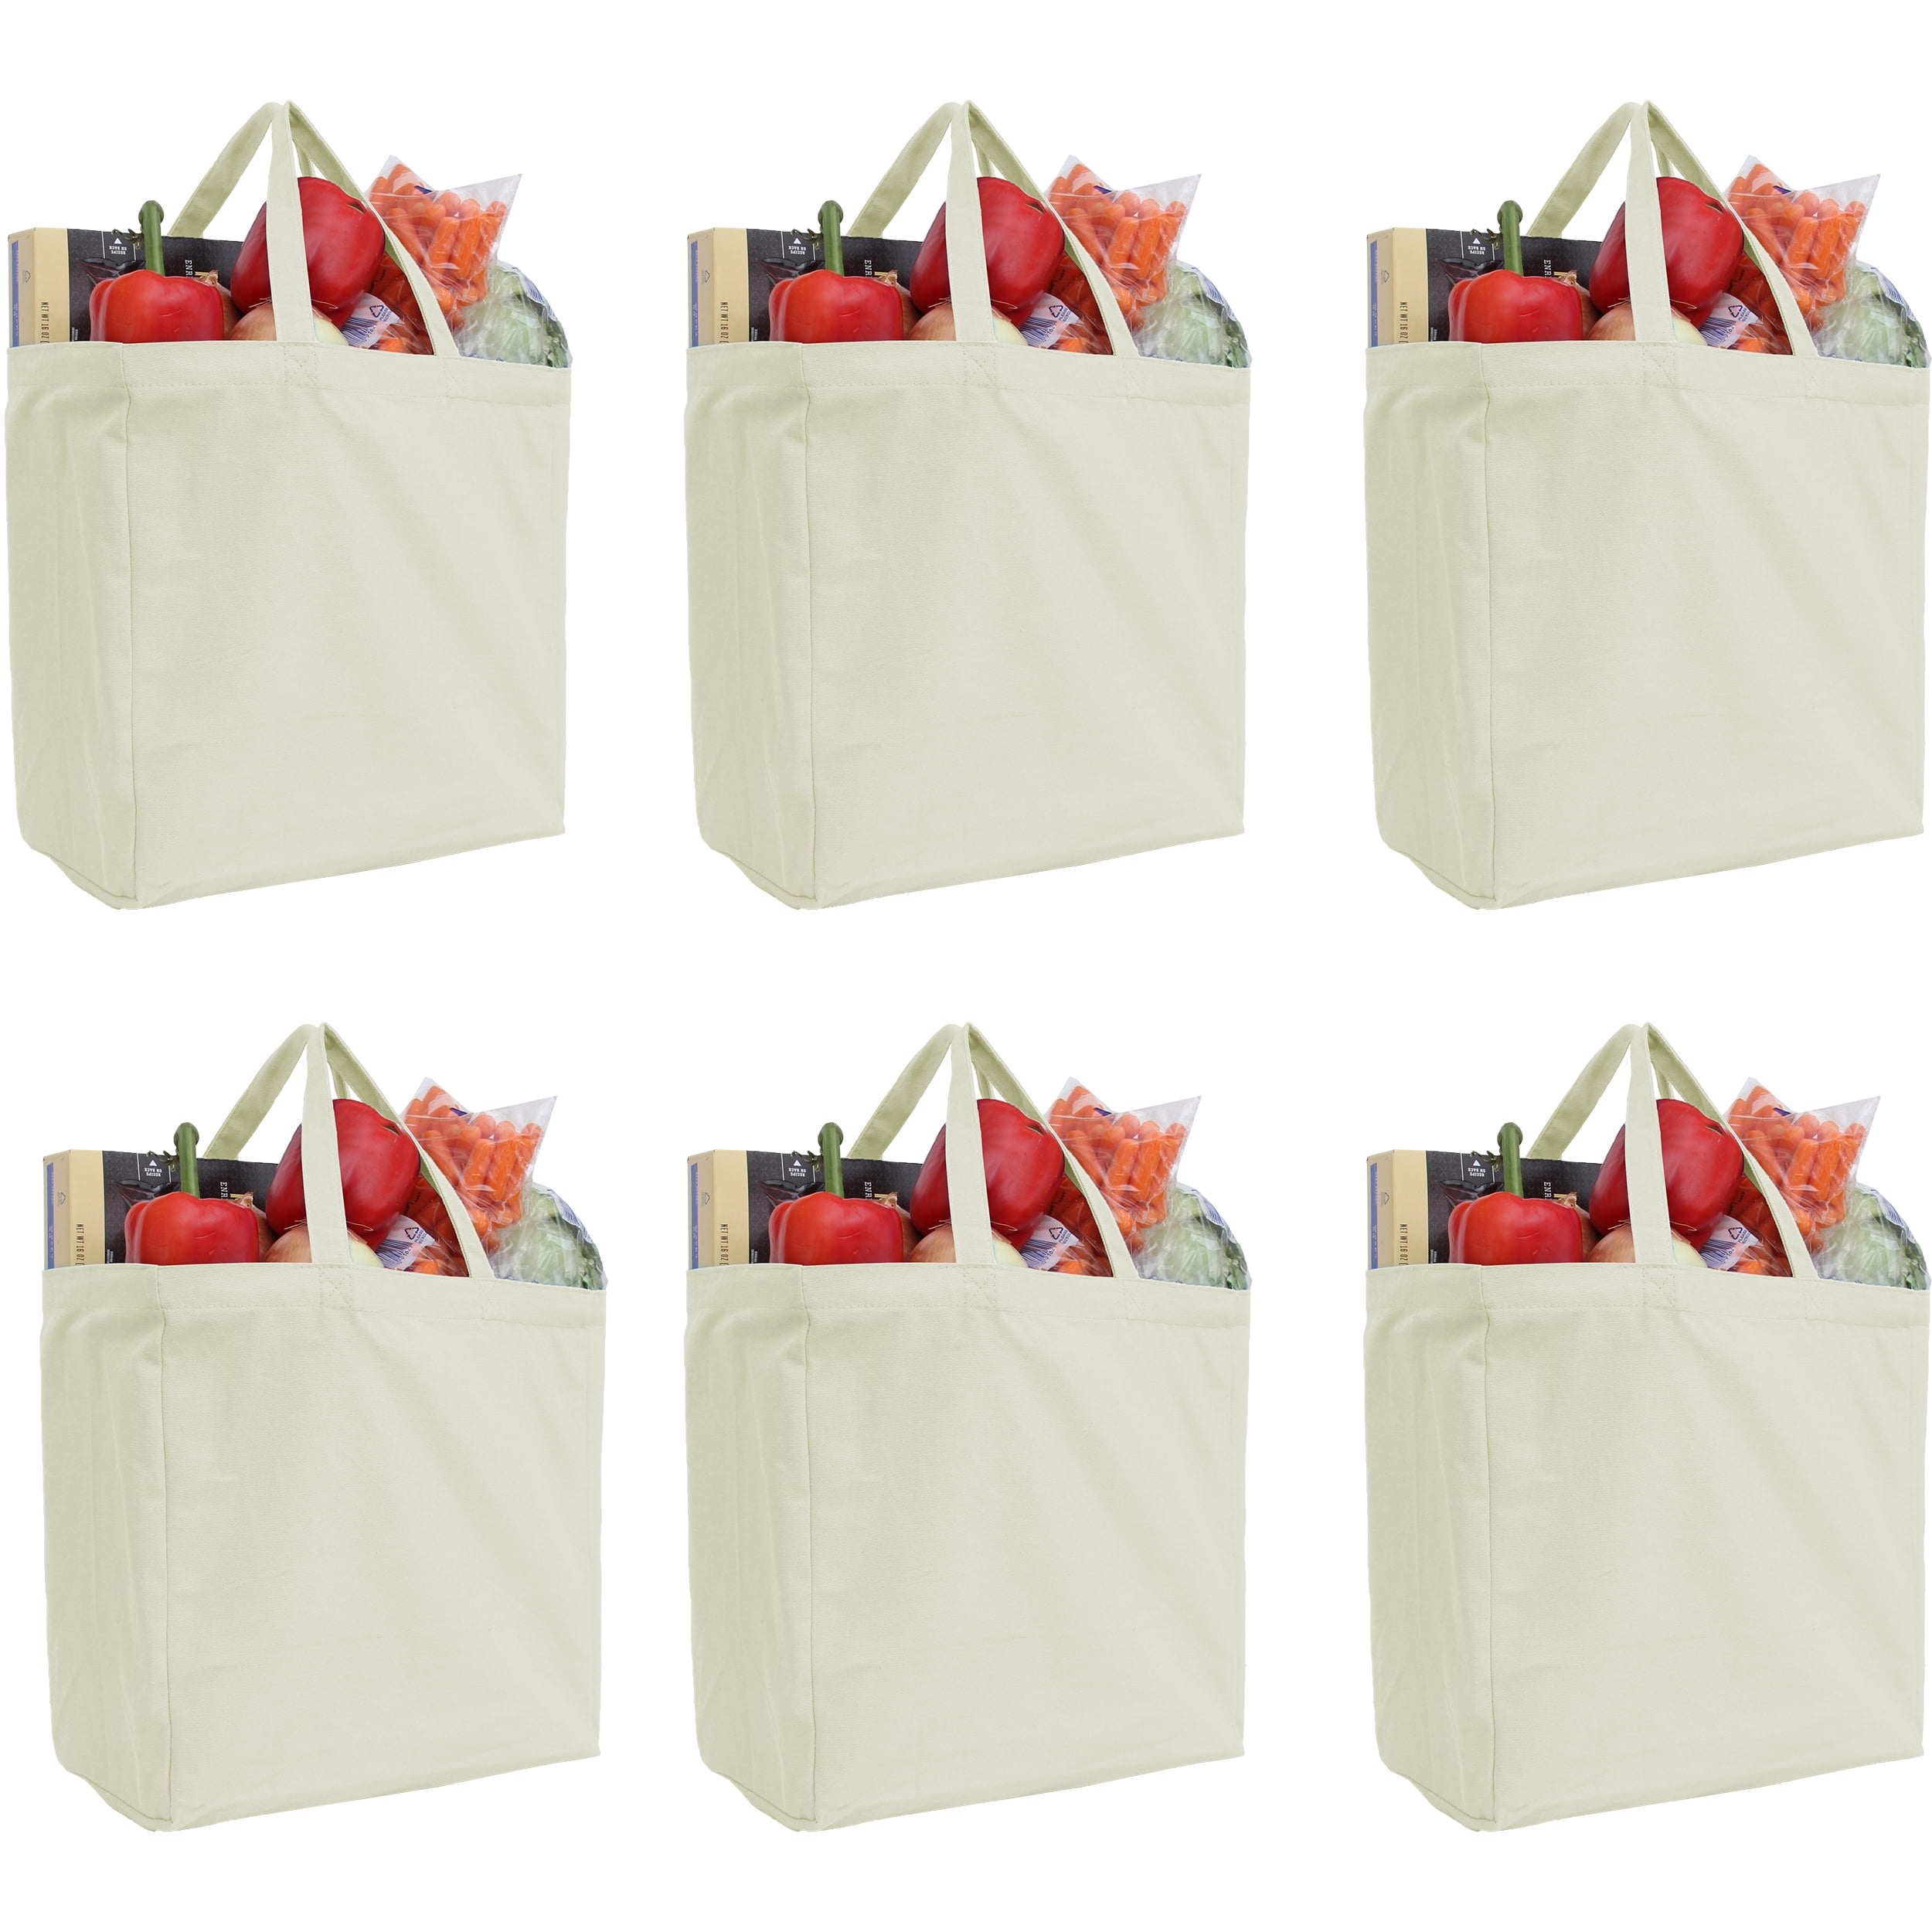 2 Pack B Reusable Shopping Bags Eco-Friendly Foldable Grocery Bags for Shopping Organizing 